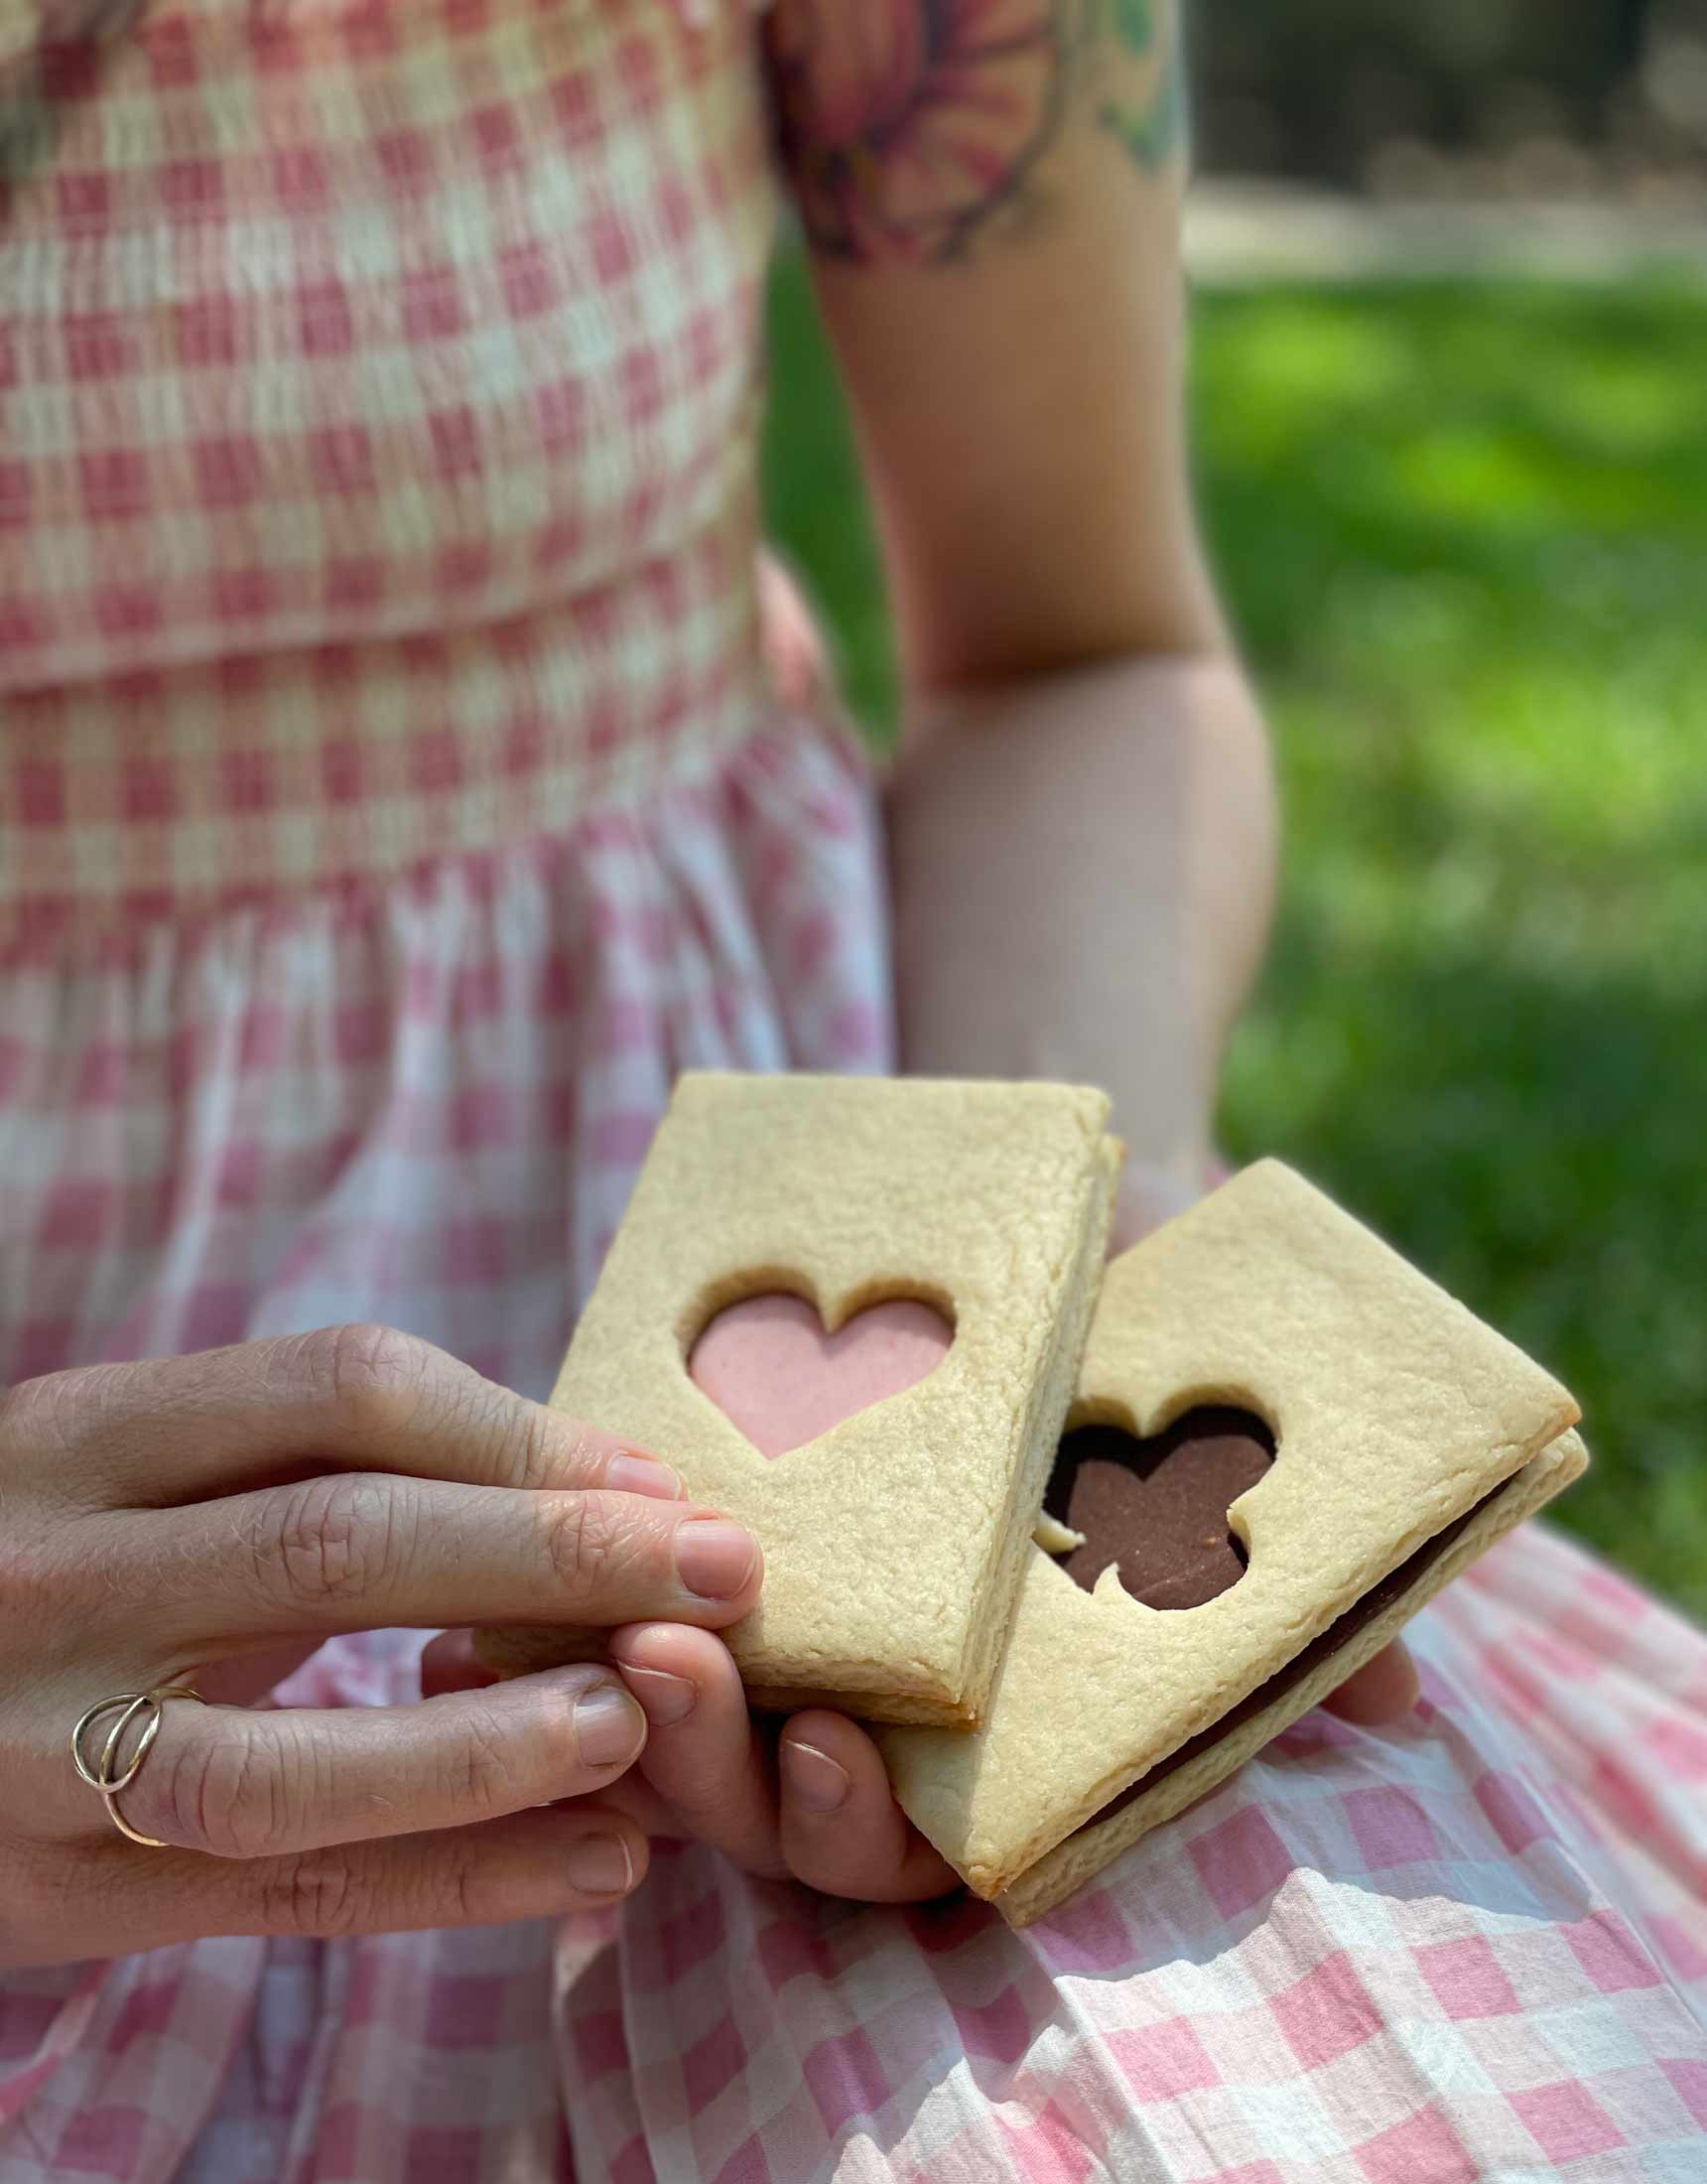 alice with her vegan sandwich cookies that look like playing cards